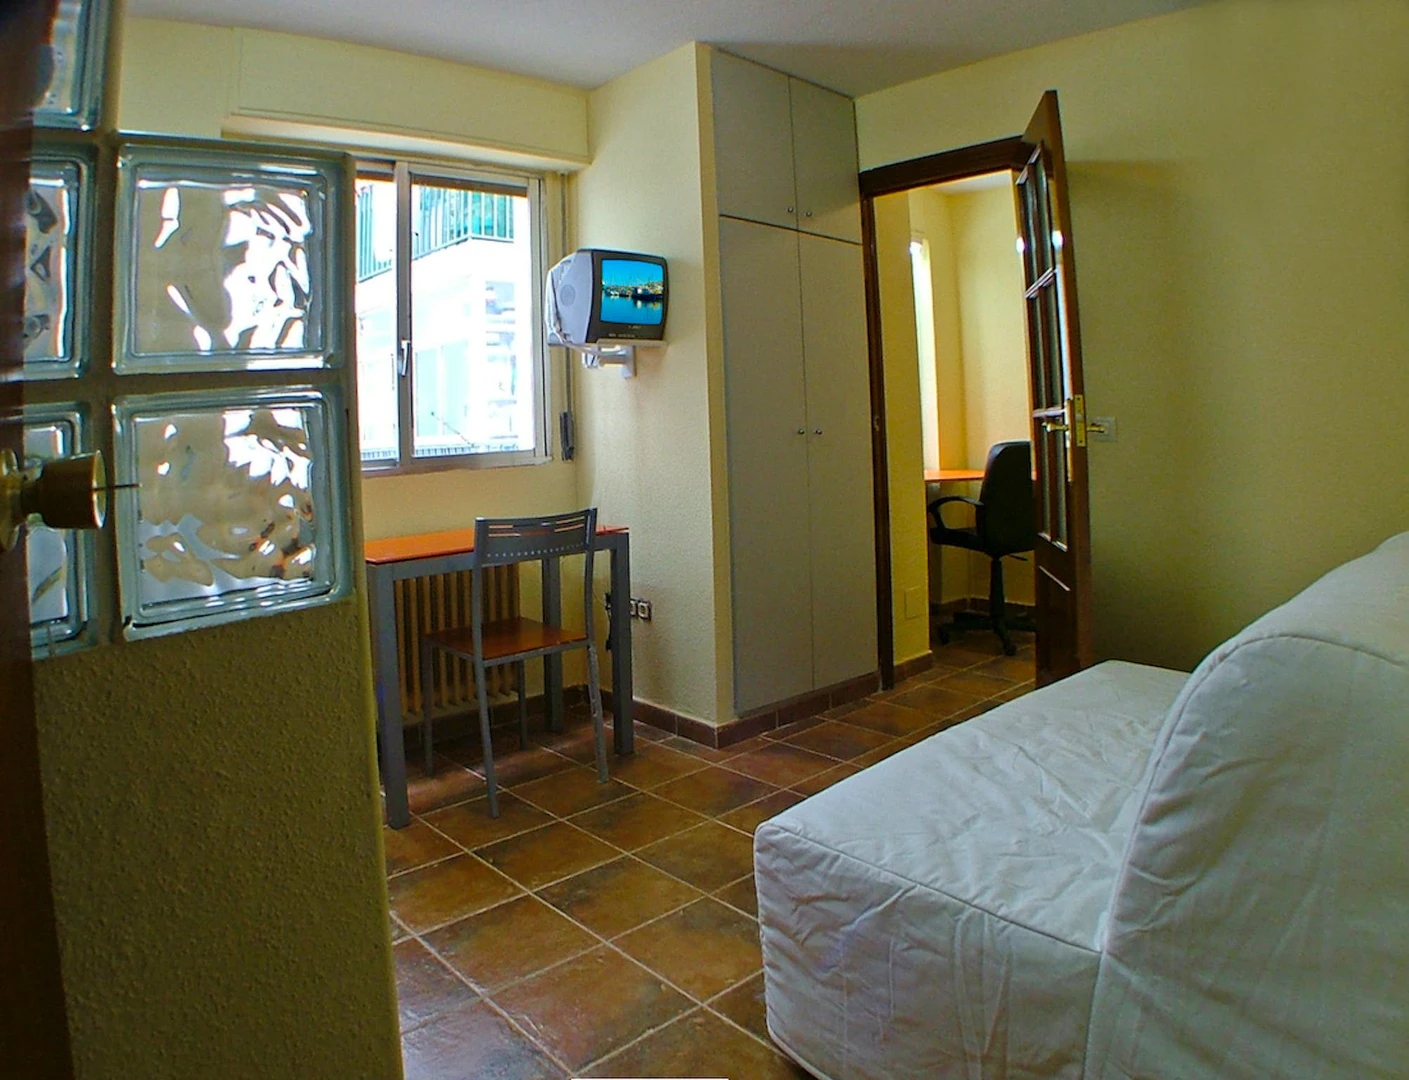 Accommodation in the centre of Salamanca